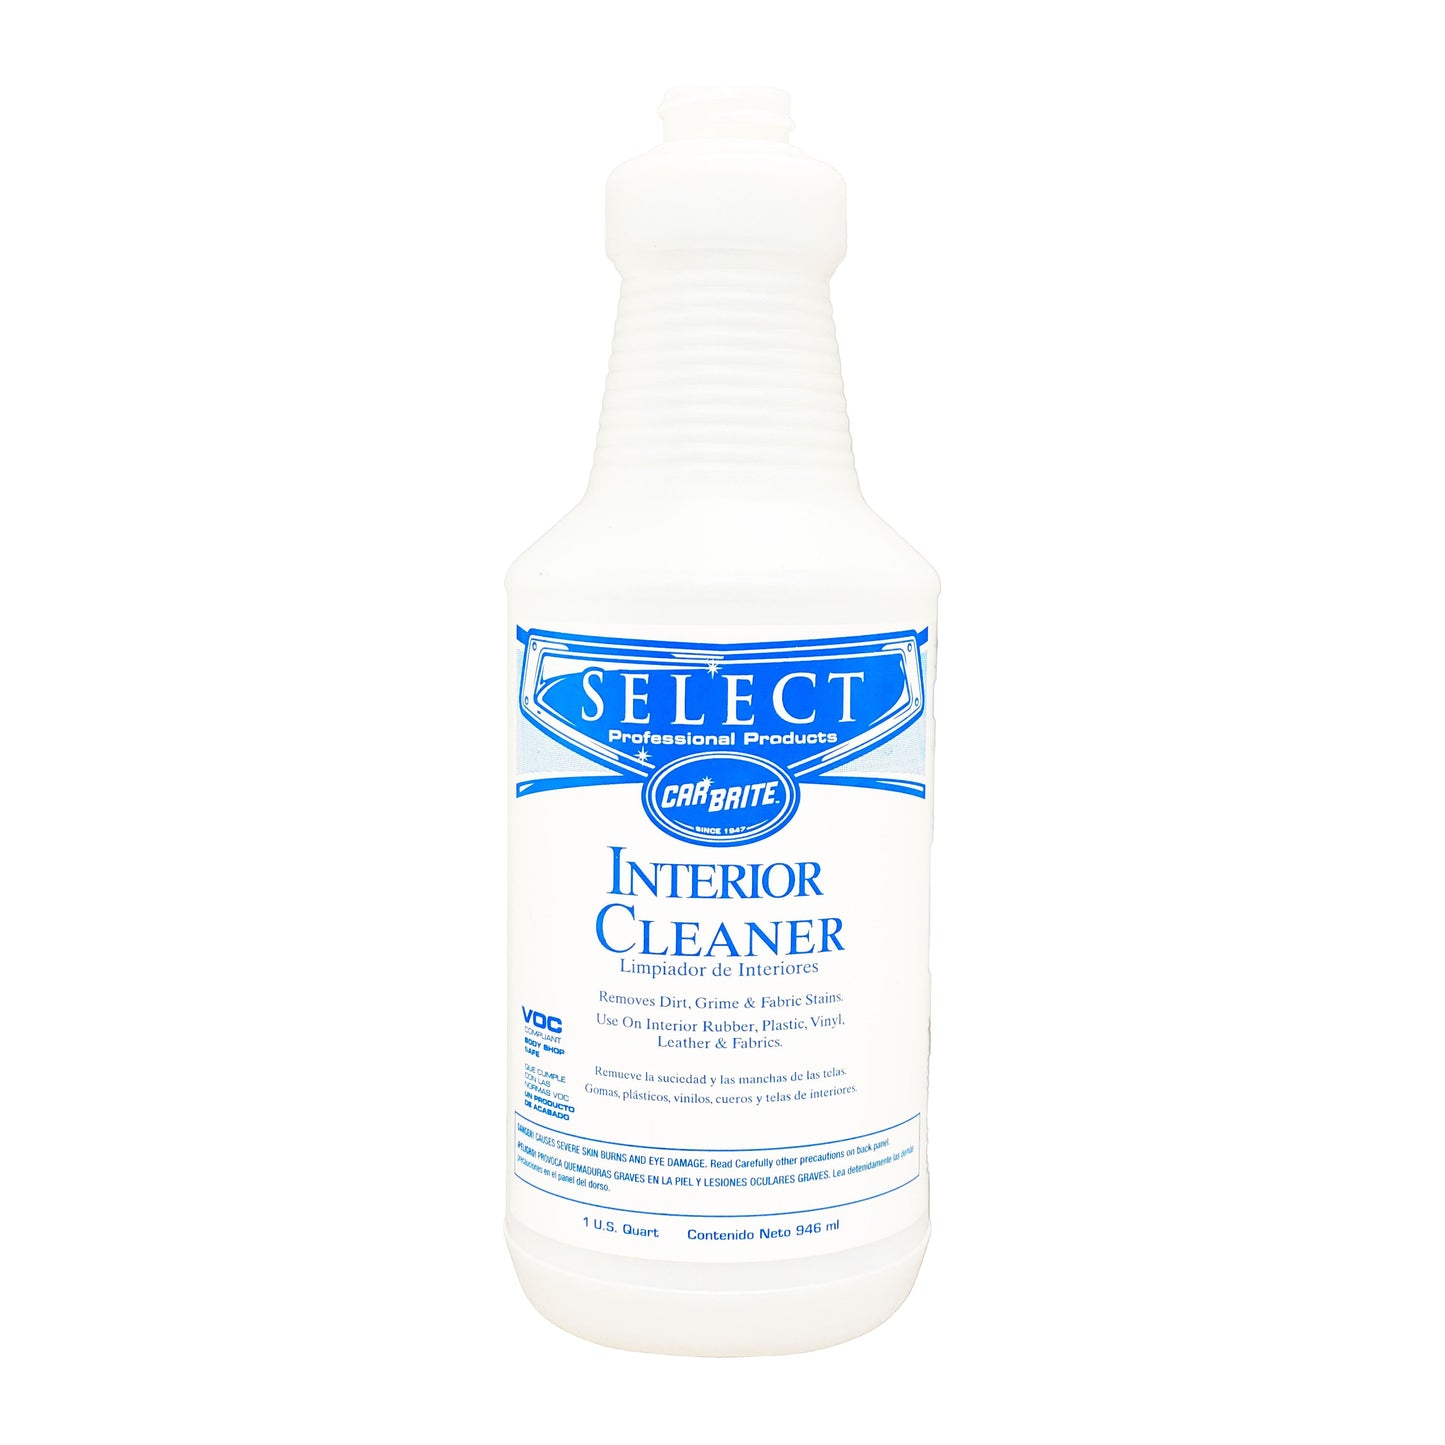 Select Interior Cleaner